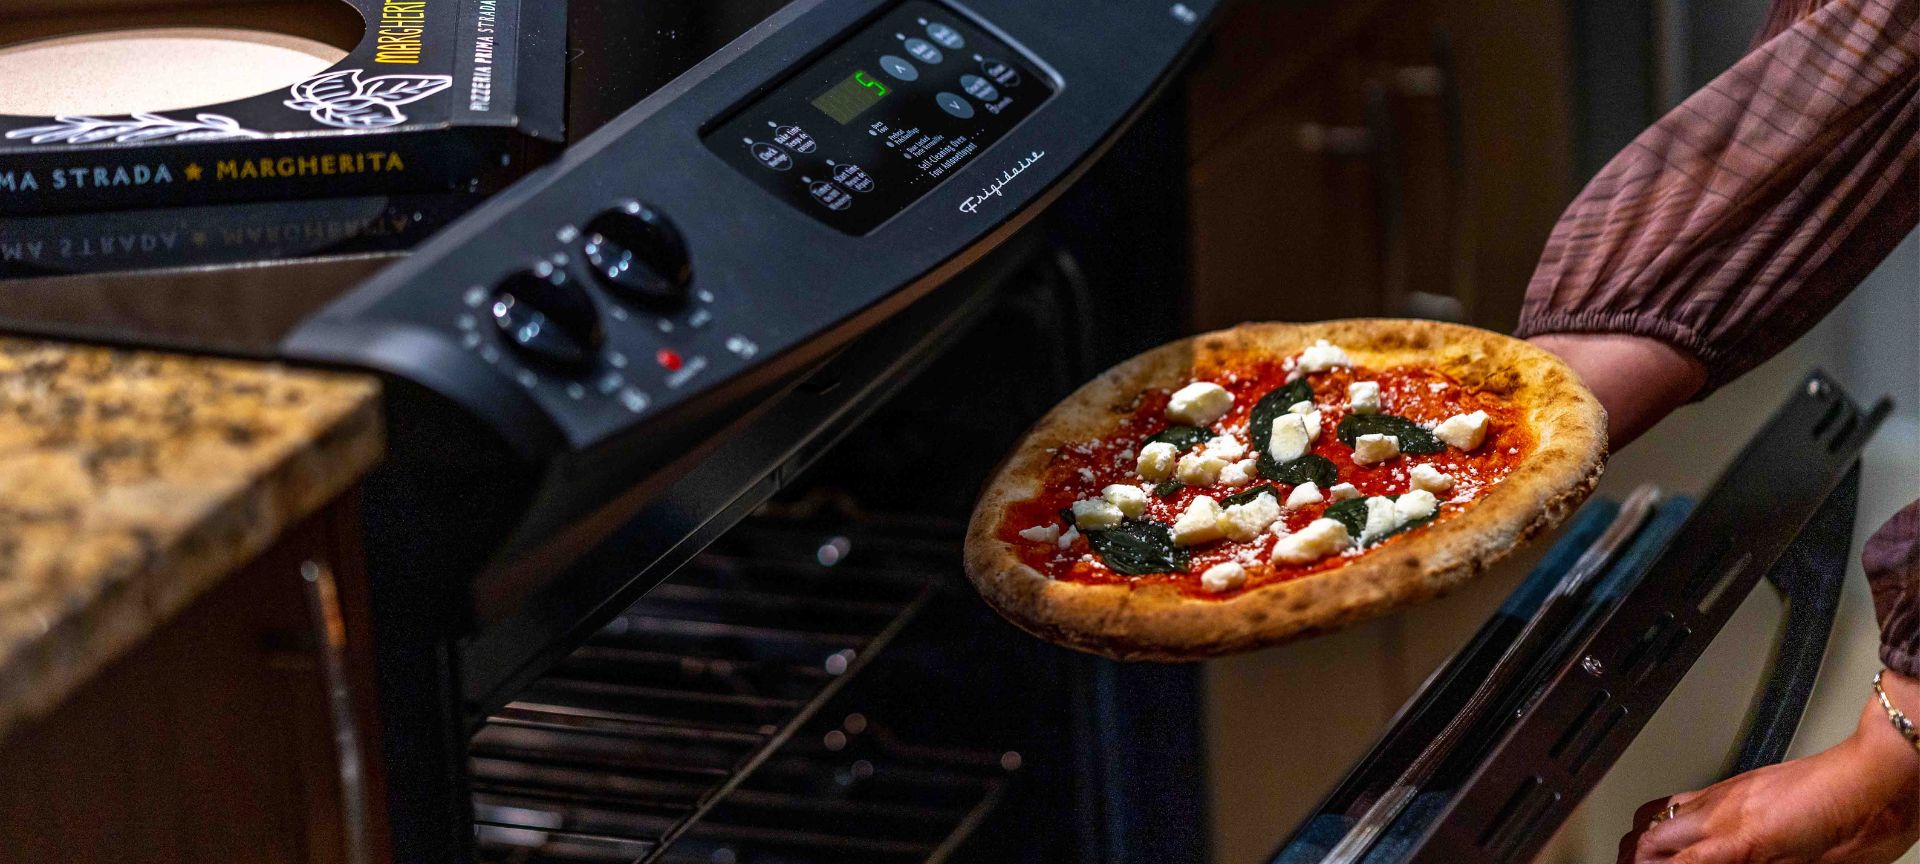 A Pizza On A Stove